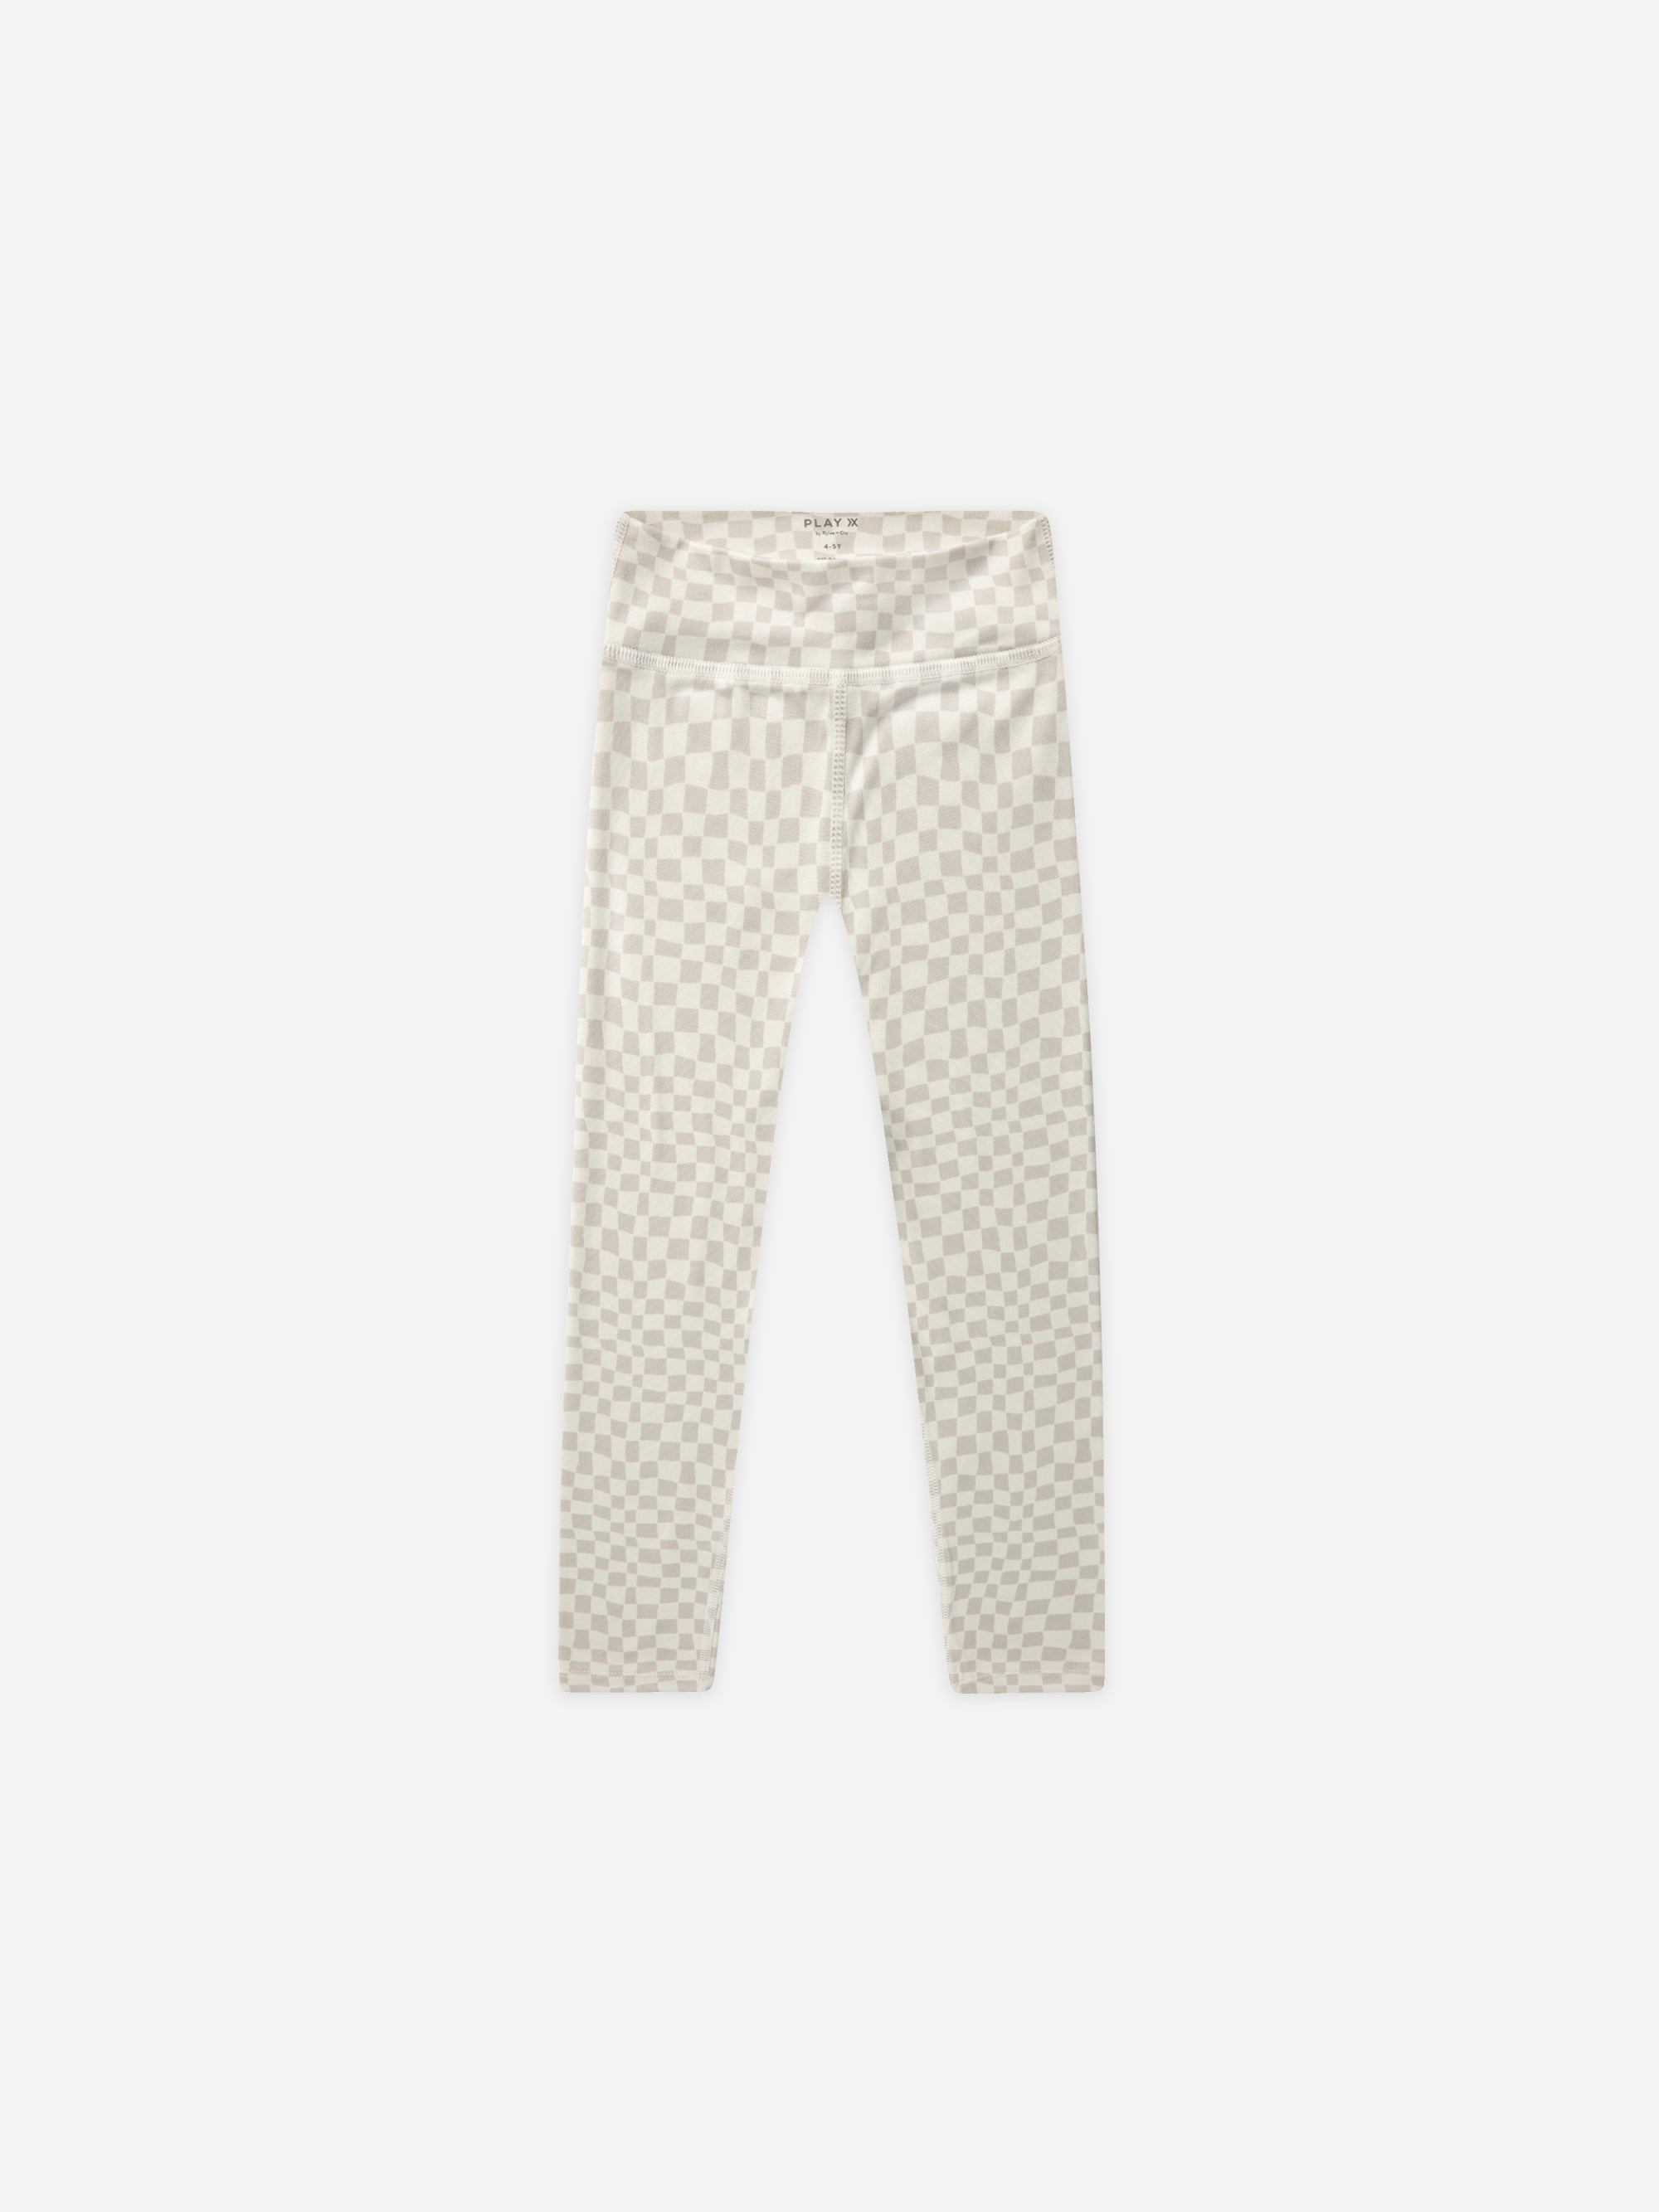 Basic Legging || Dove Check - Rylee + Cru | Kids Clothes | Trendy Baby Clothes | Modern Infant Outfits |